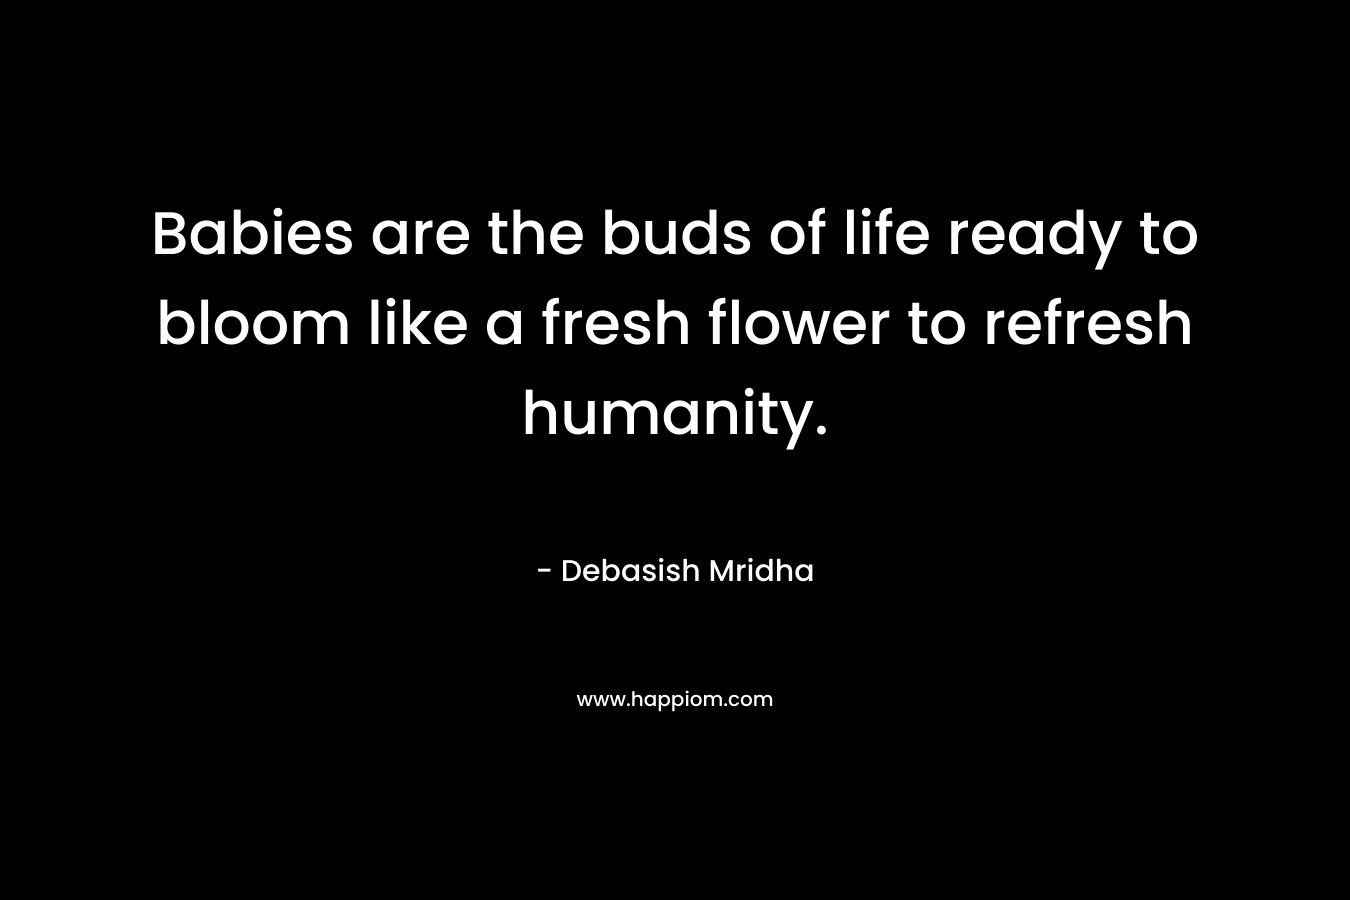 Babies are the buds of life ready to bloom like a fresh flower to refresh humanity. – Debasish Mridha